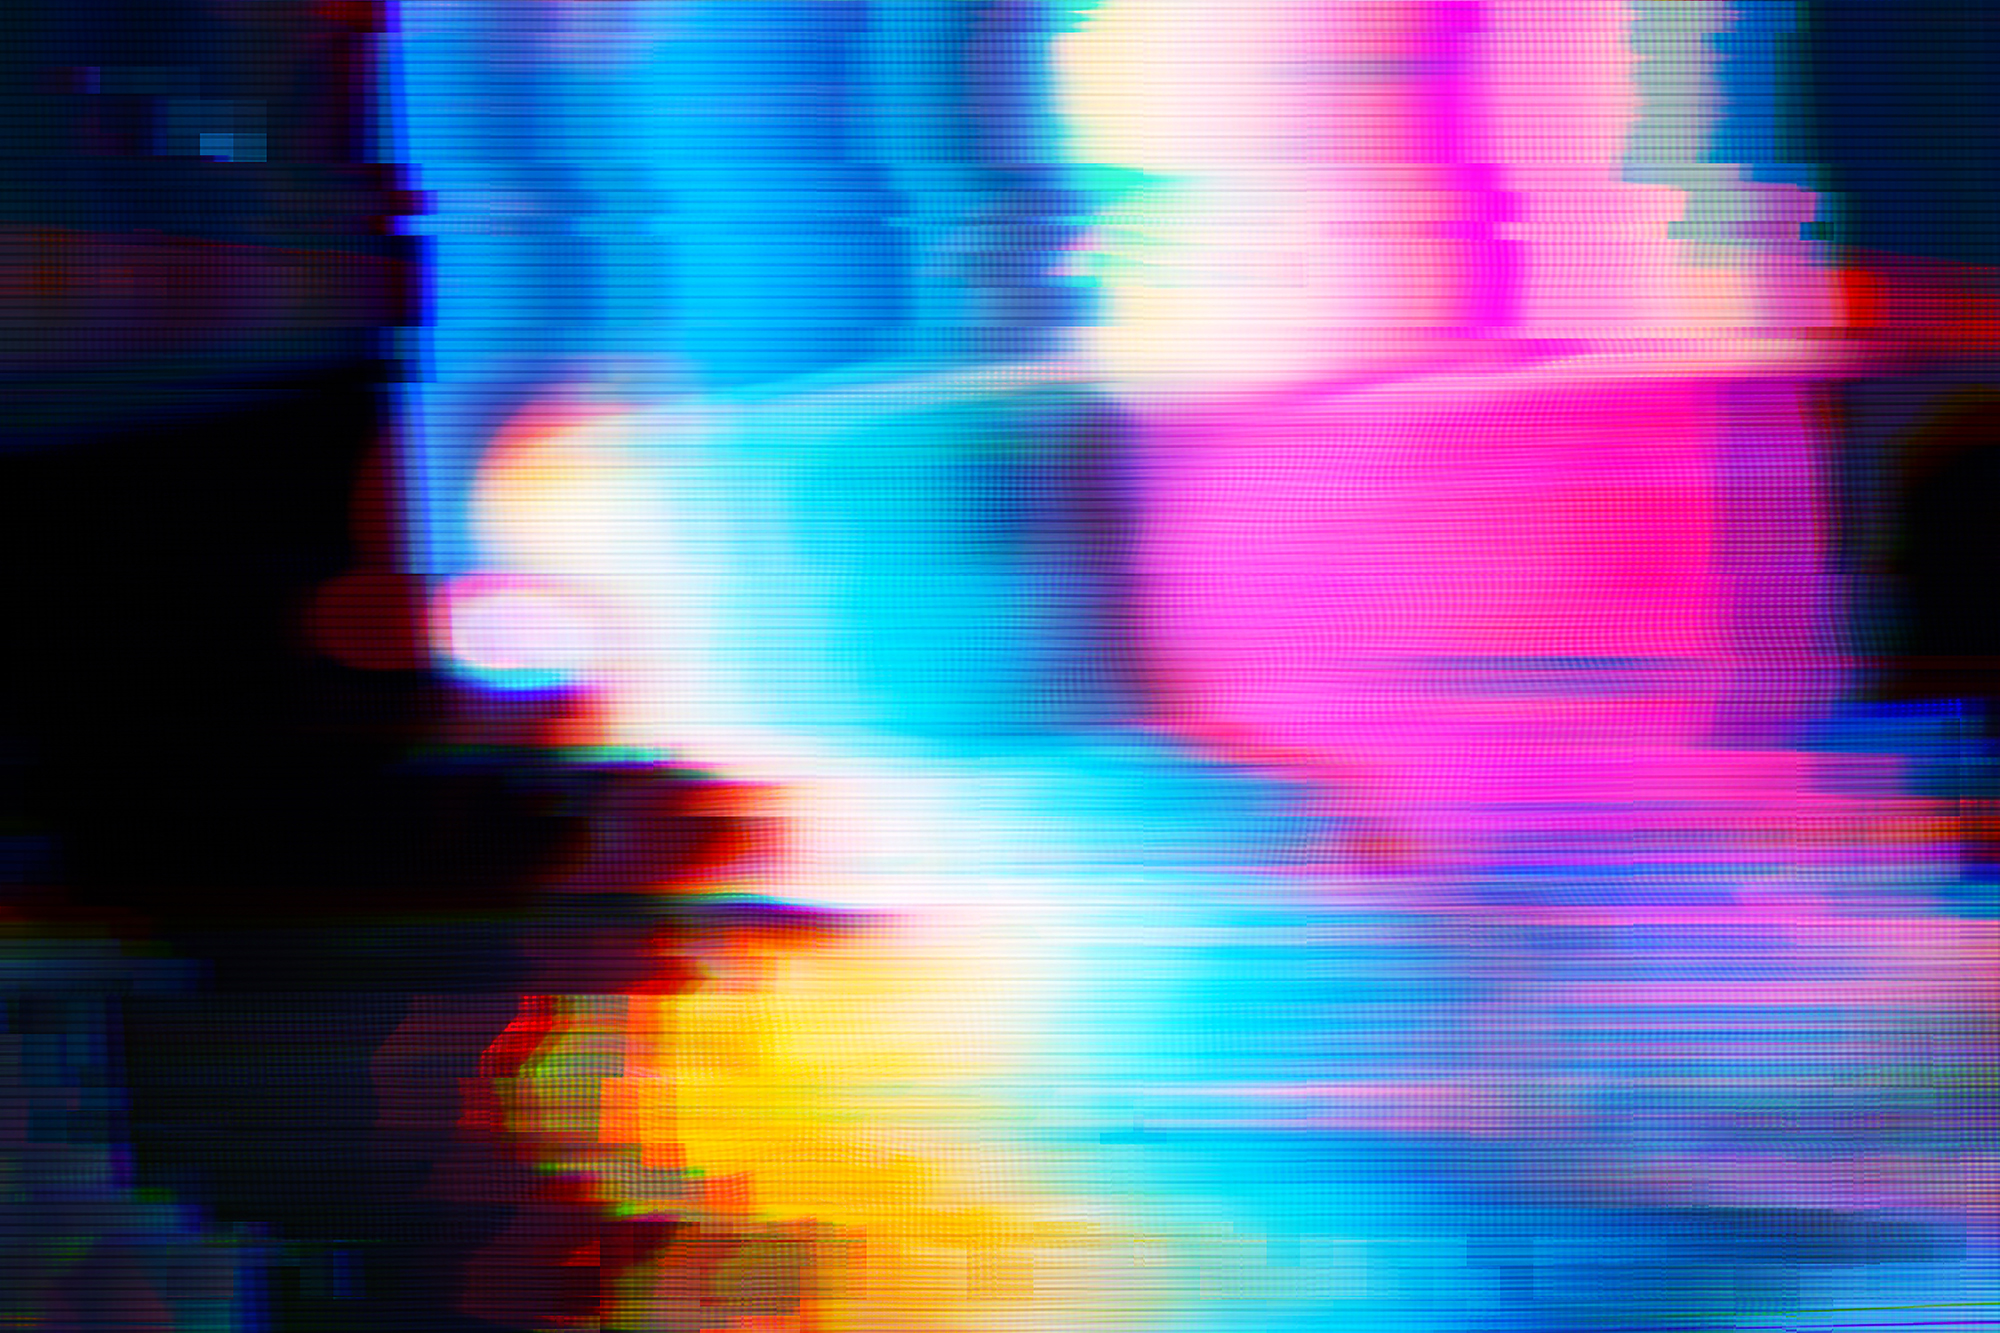 Abstract glitchy image of shades of blue, pink, yellow, and black